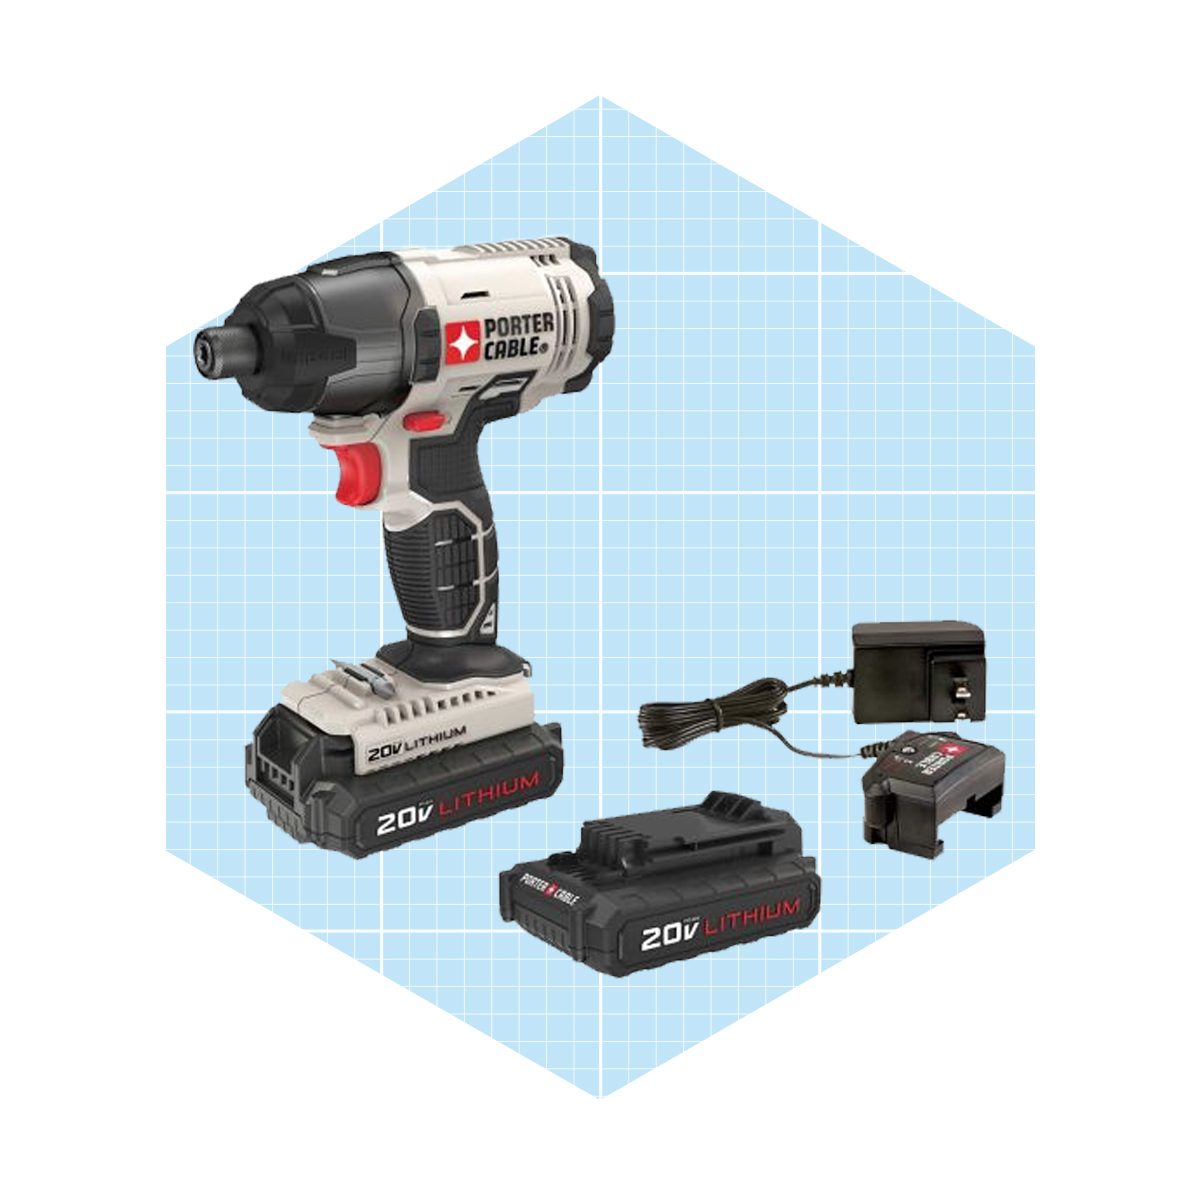 Porter Cable 20v 1:4 In. Impact Driver Kit Ecomm Tractorsupply.com